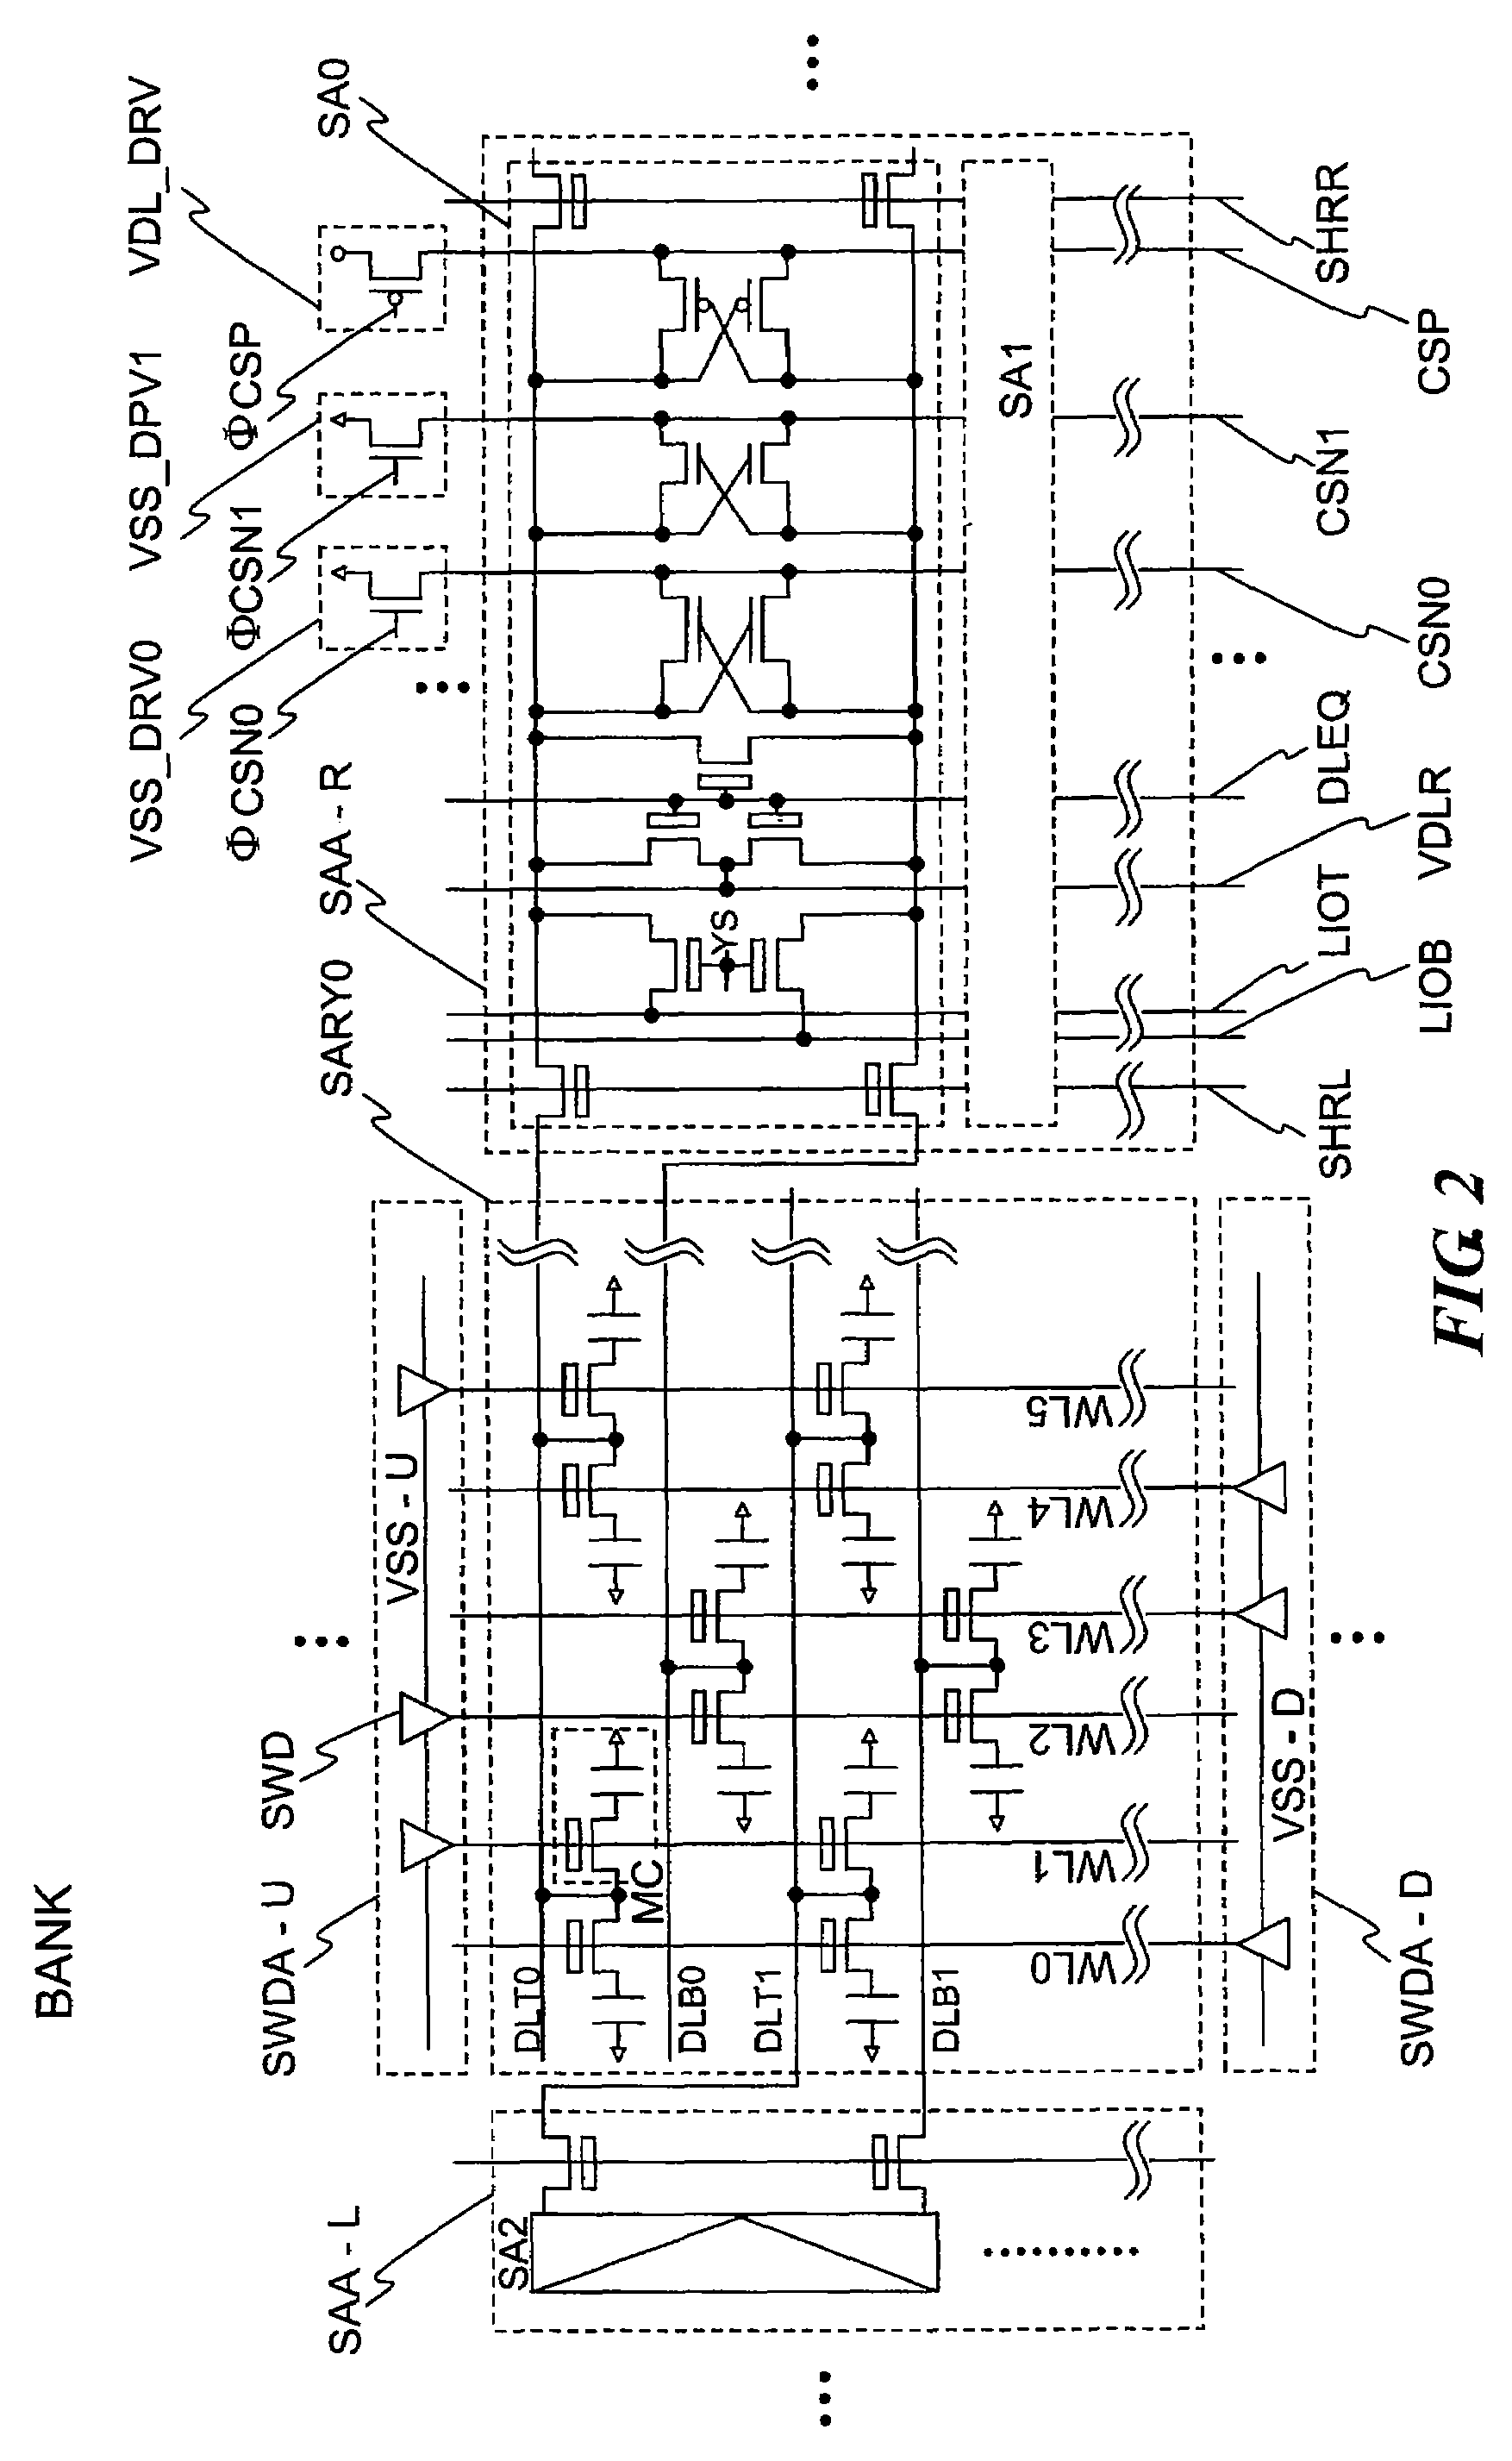 Memory device having high speed sense amplifier comprising pull-up circuit and pull-down circuits with different drivability for each